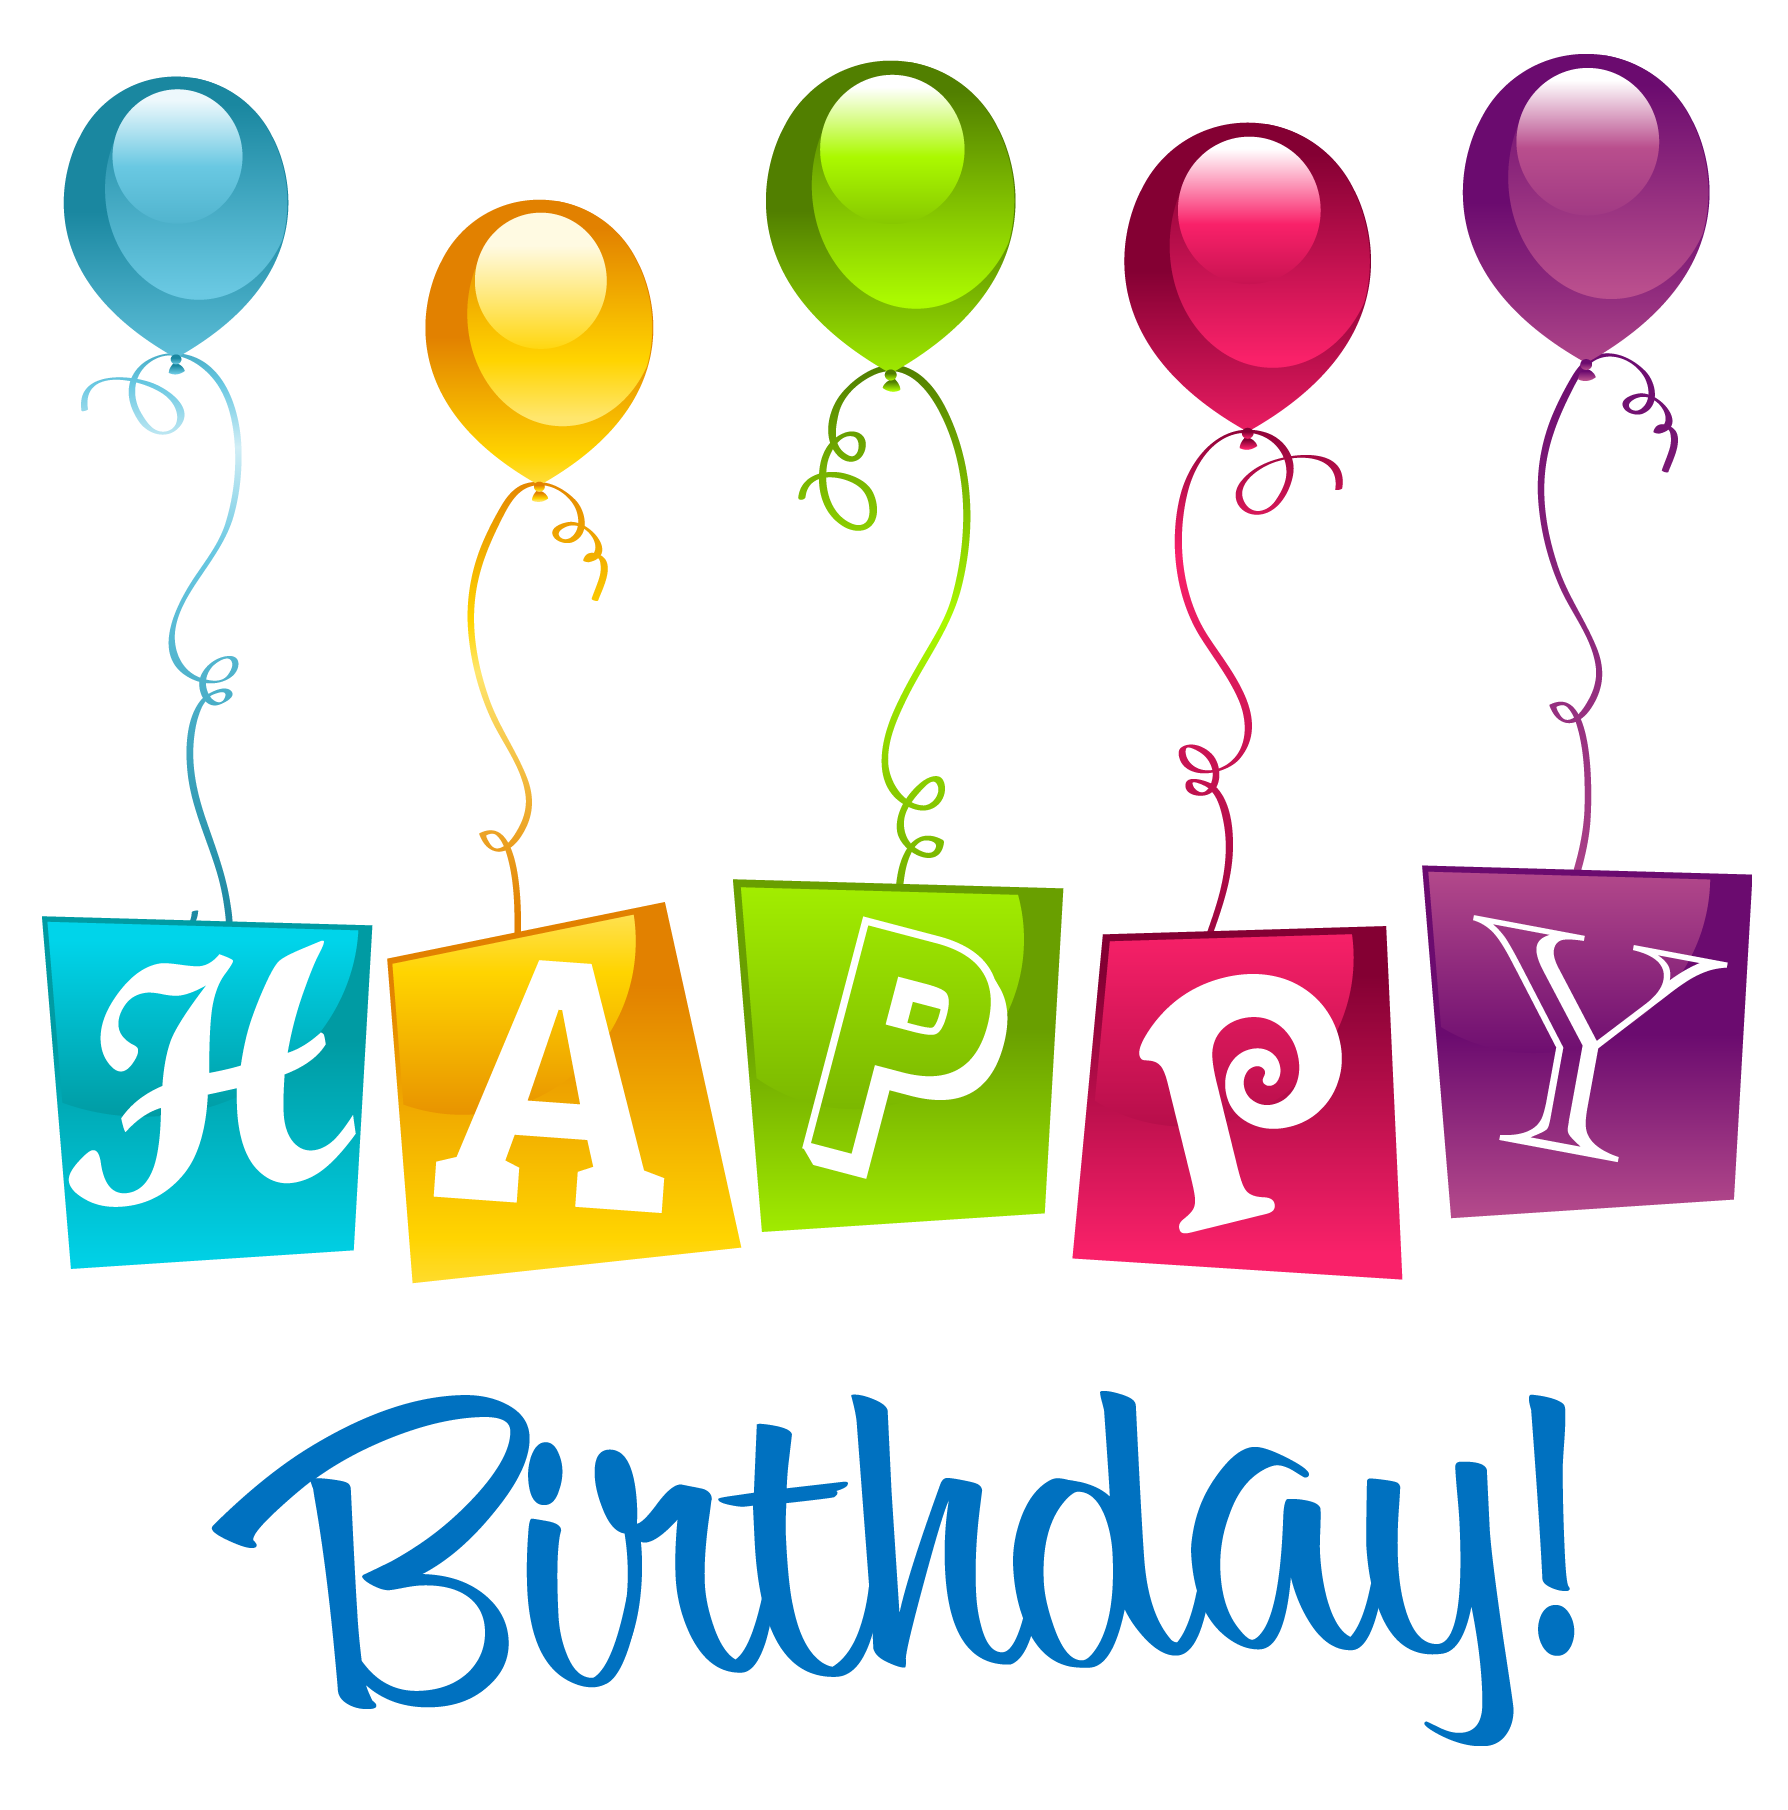 Happy Birthday PNG Clipart Picture - ClipArt Best - ClipArt Best